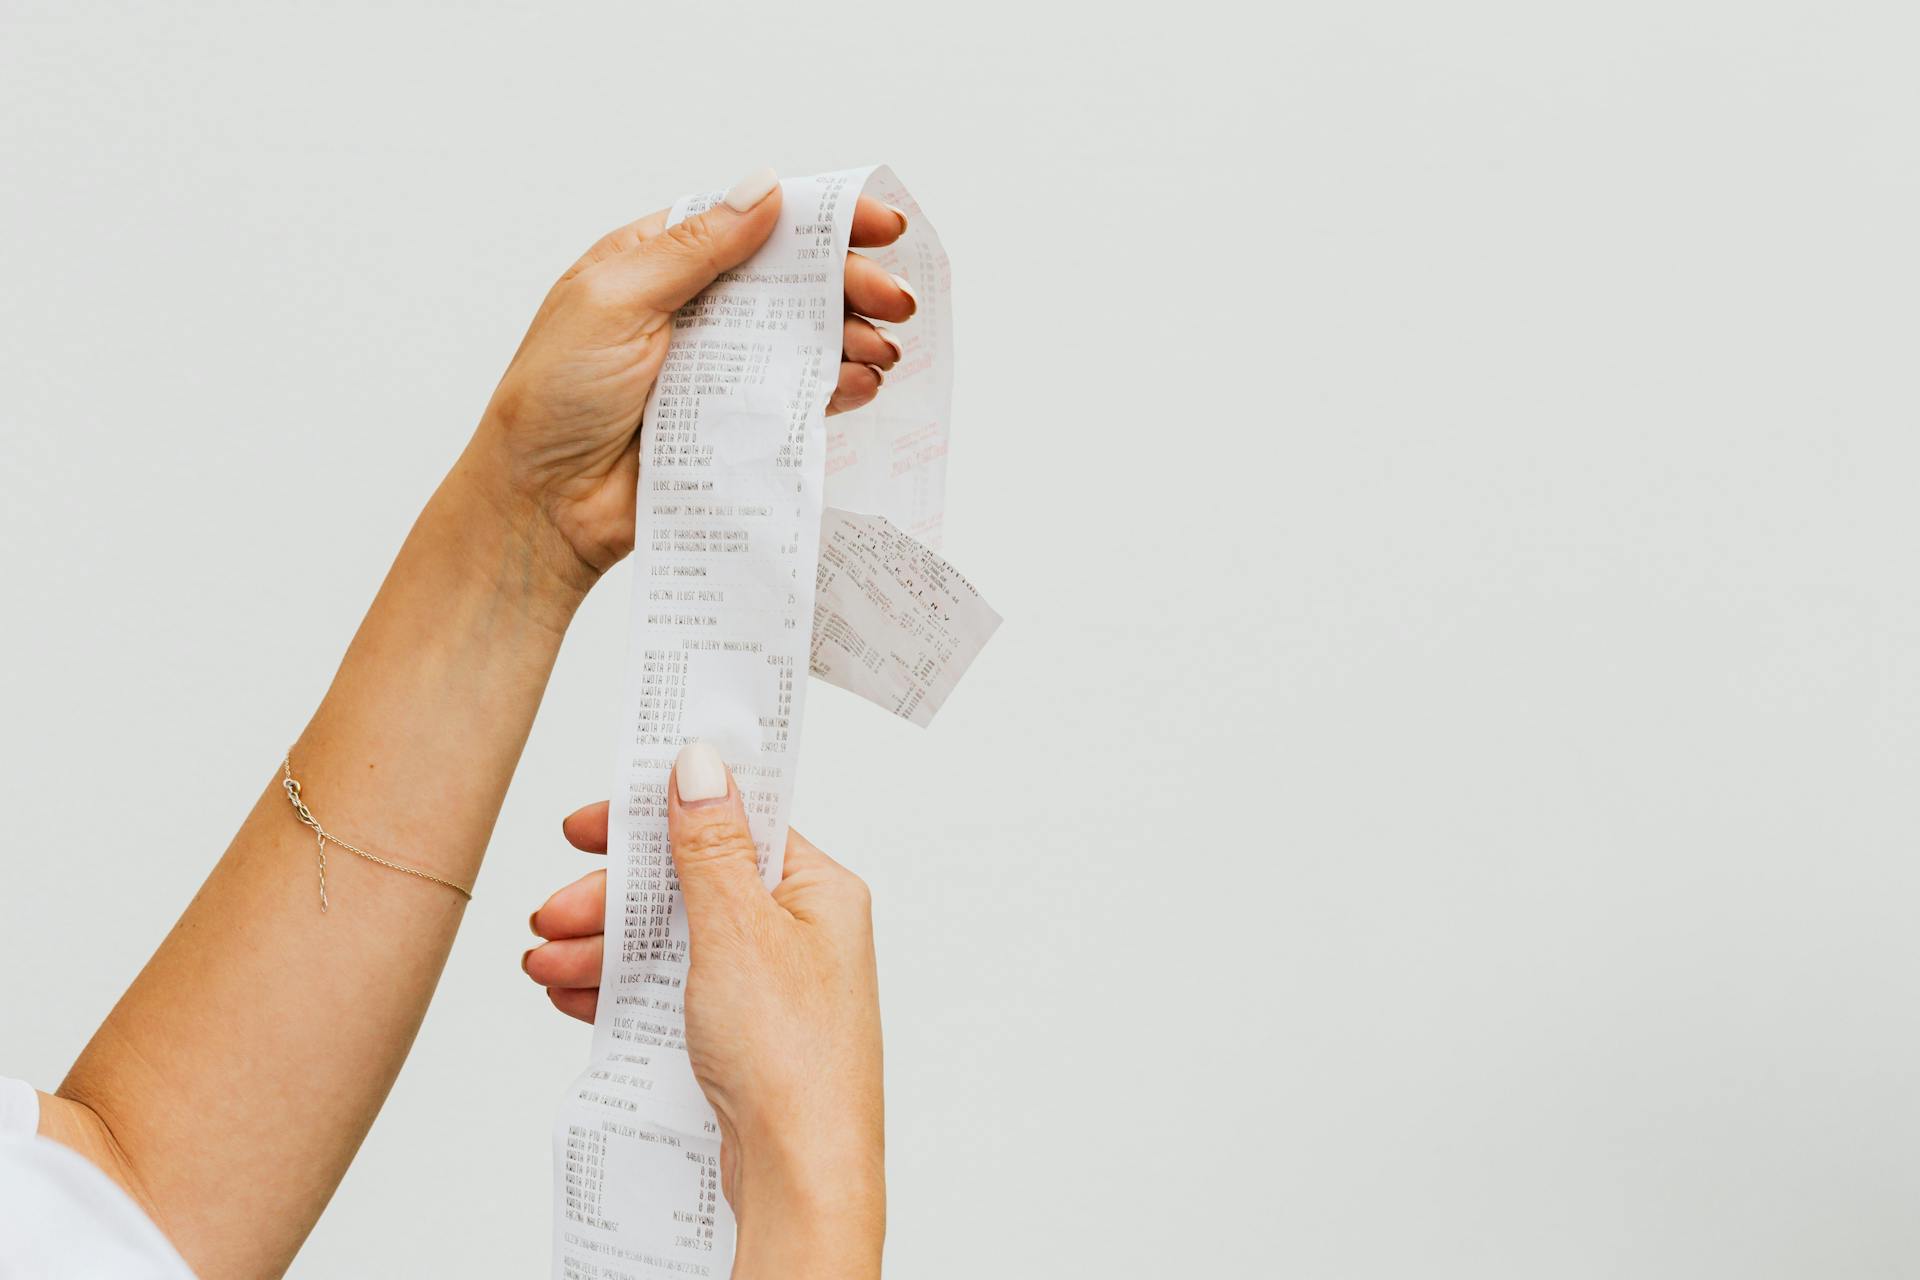 Hand holding a receipt | Source: Pexels